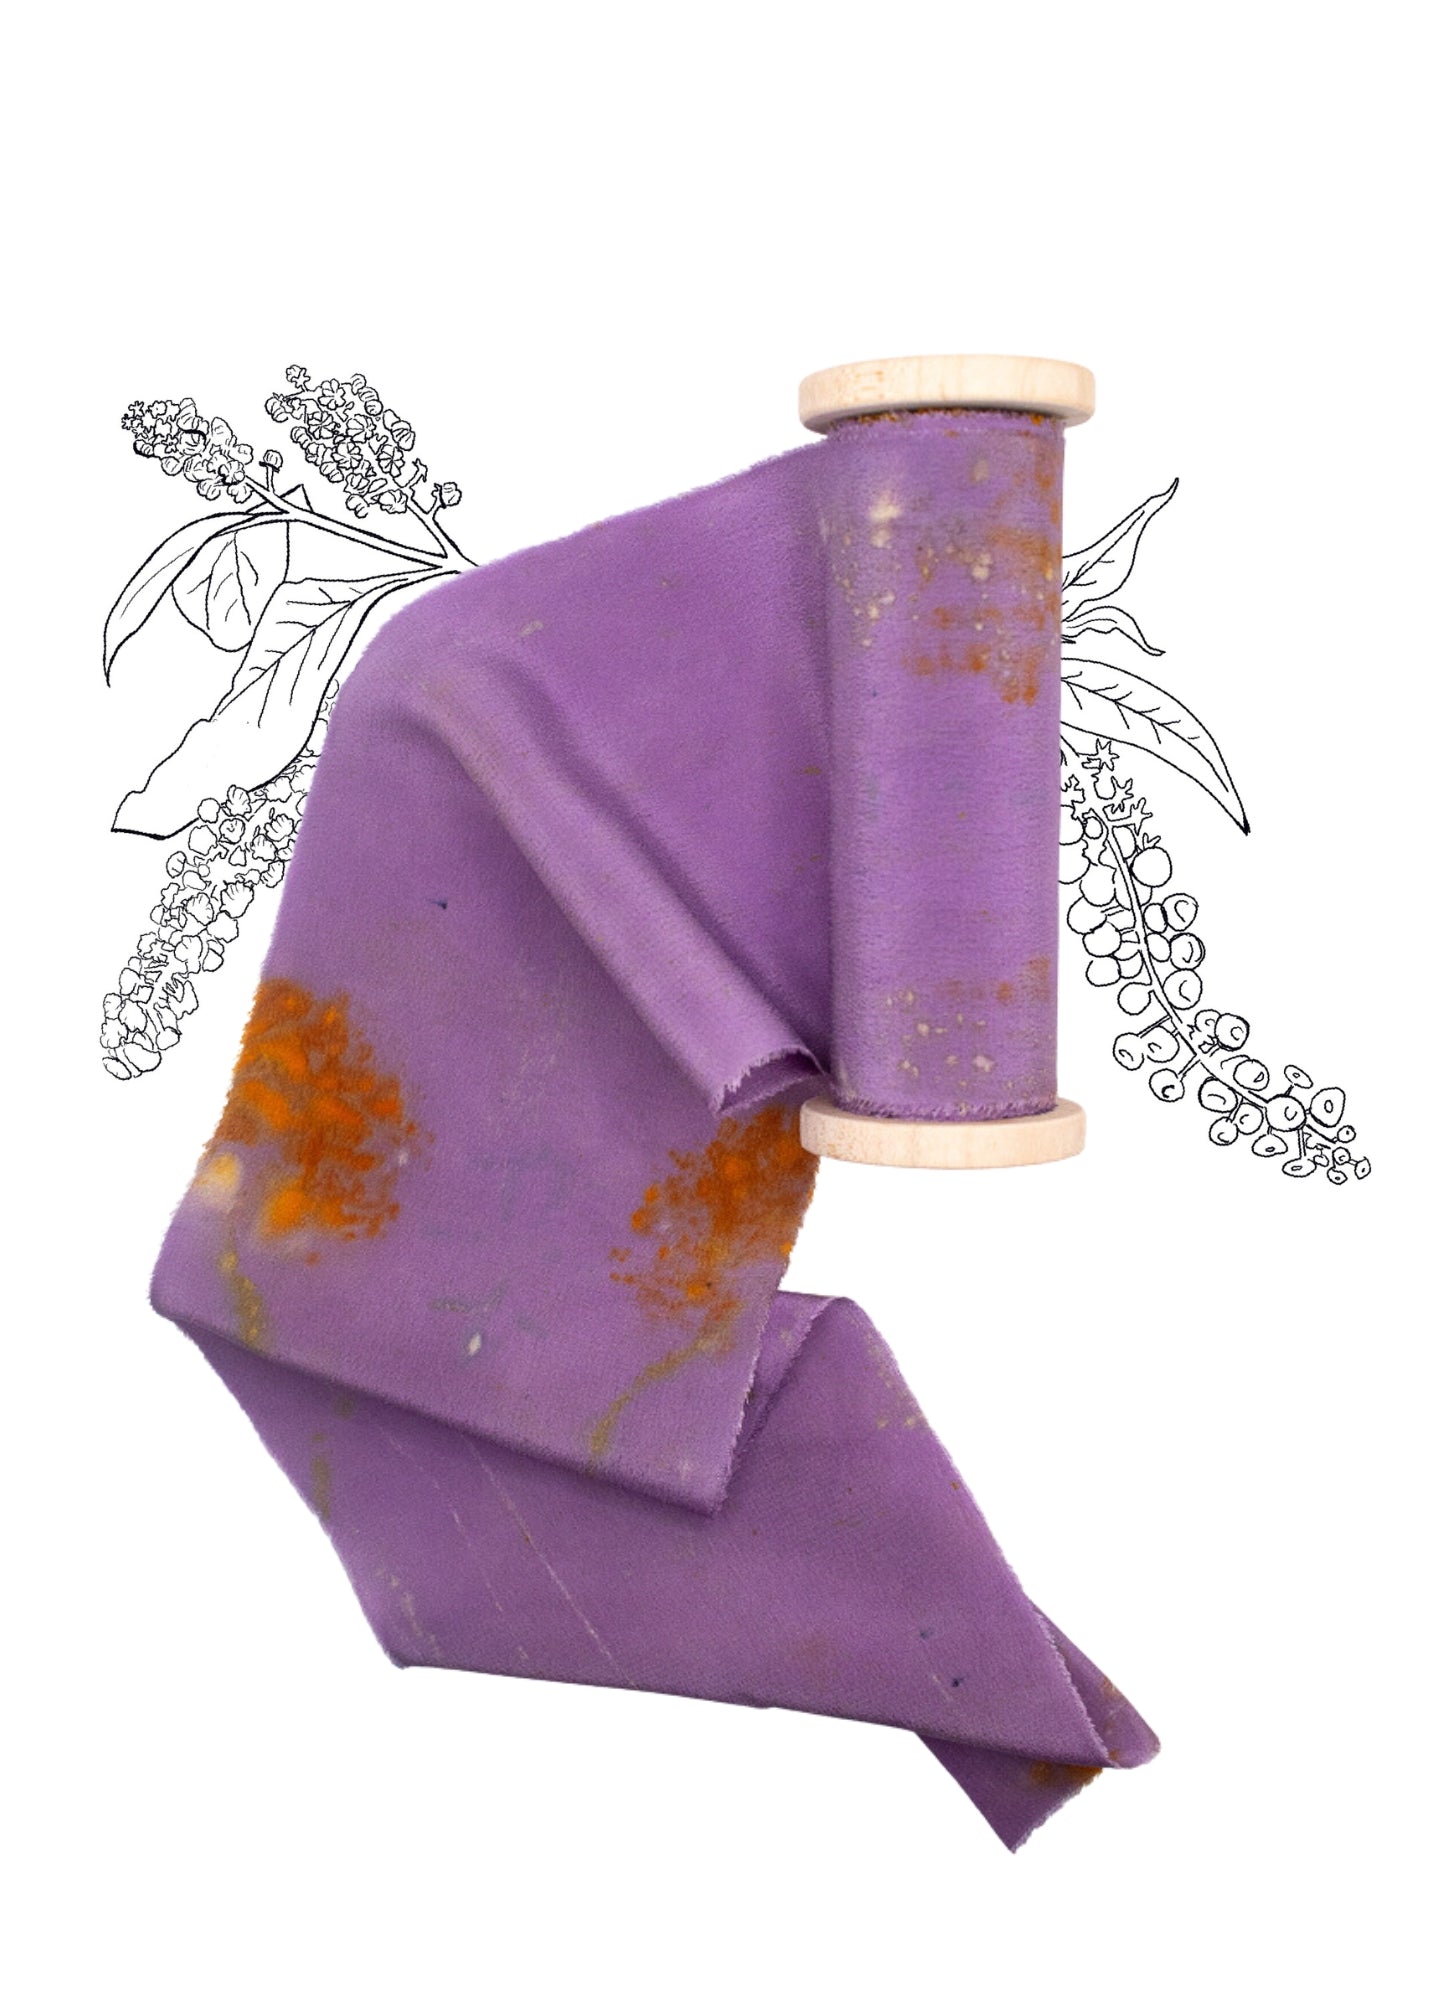 Load image into Gallery viewer, Limited Edition Eco Print #16 Crepe de Chine Silk Ribbon - Purple - The Lesser Bear
